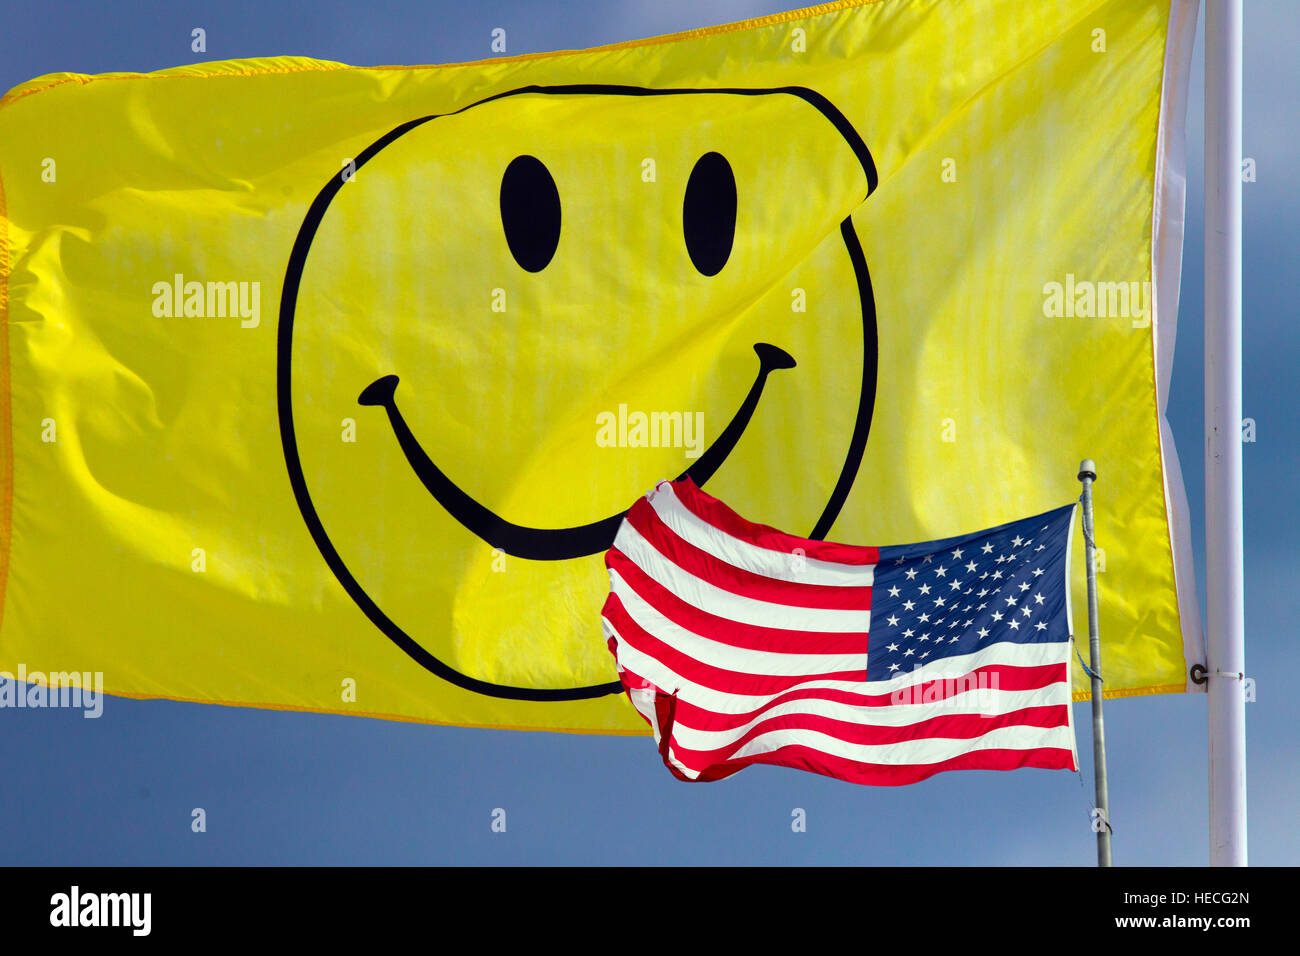 Smiley faced flag and flag of the United States of America Stock Photo